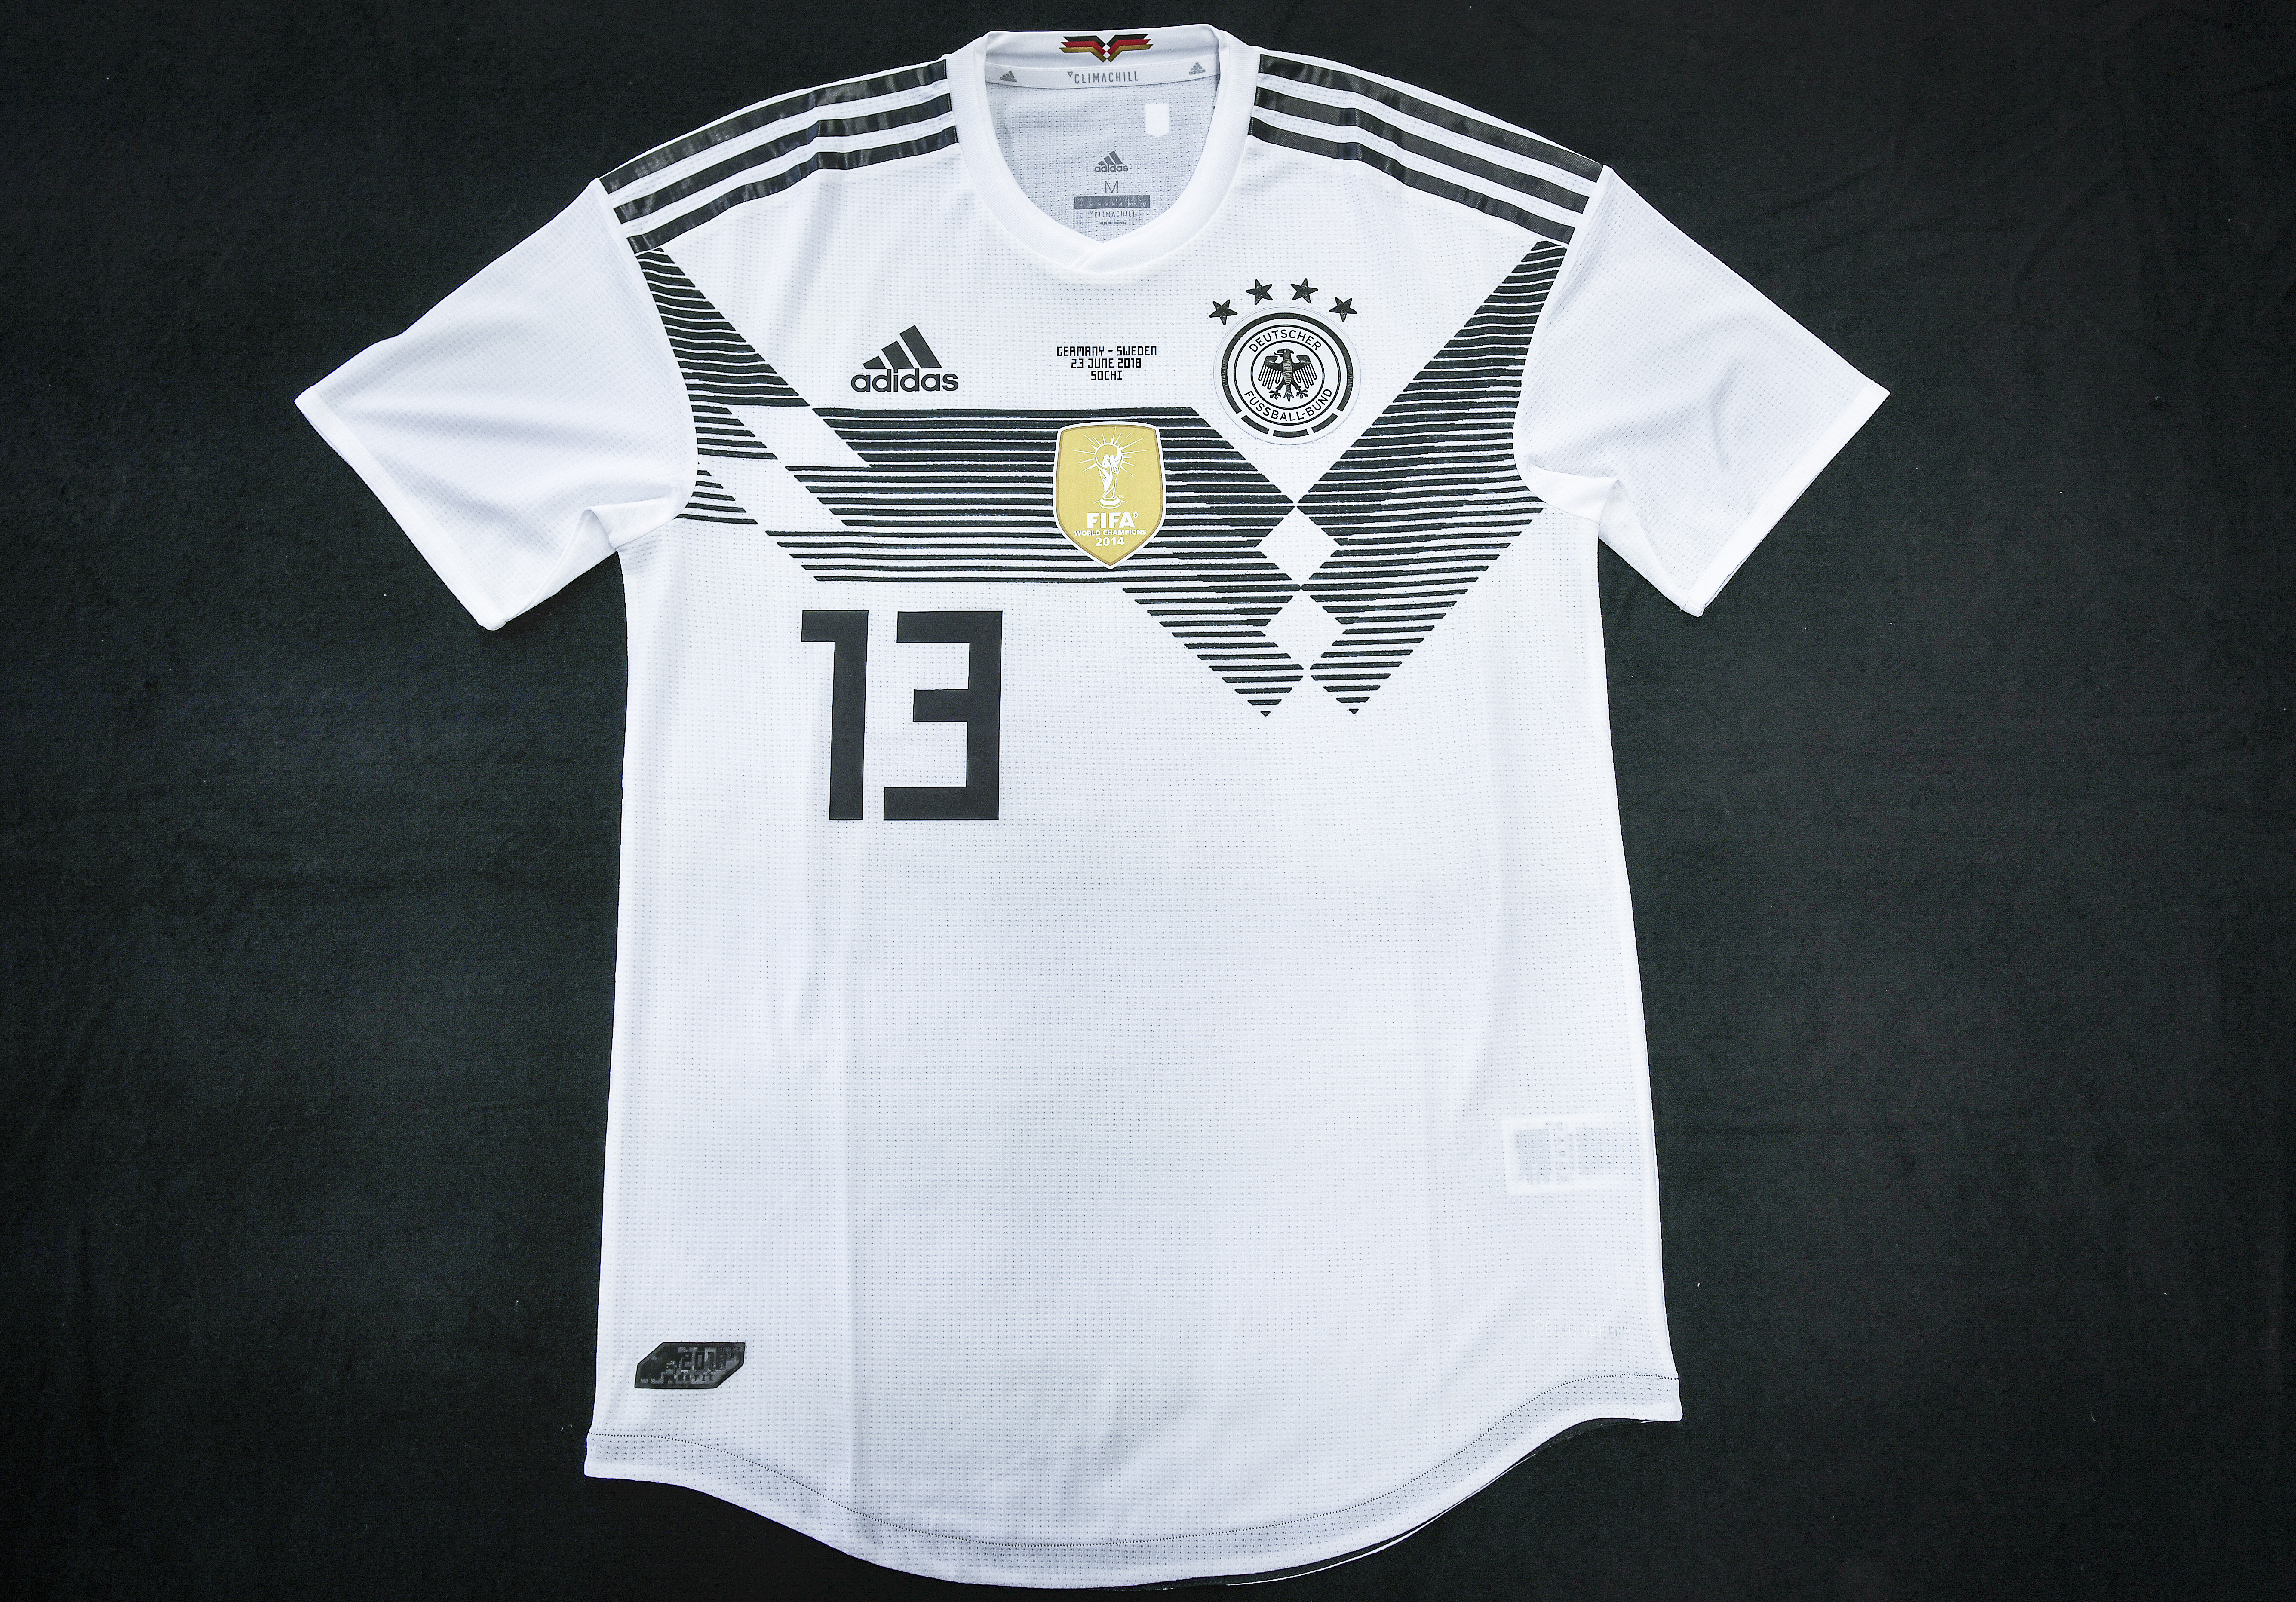 germany world cup 2014 jersey